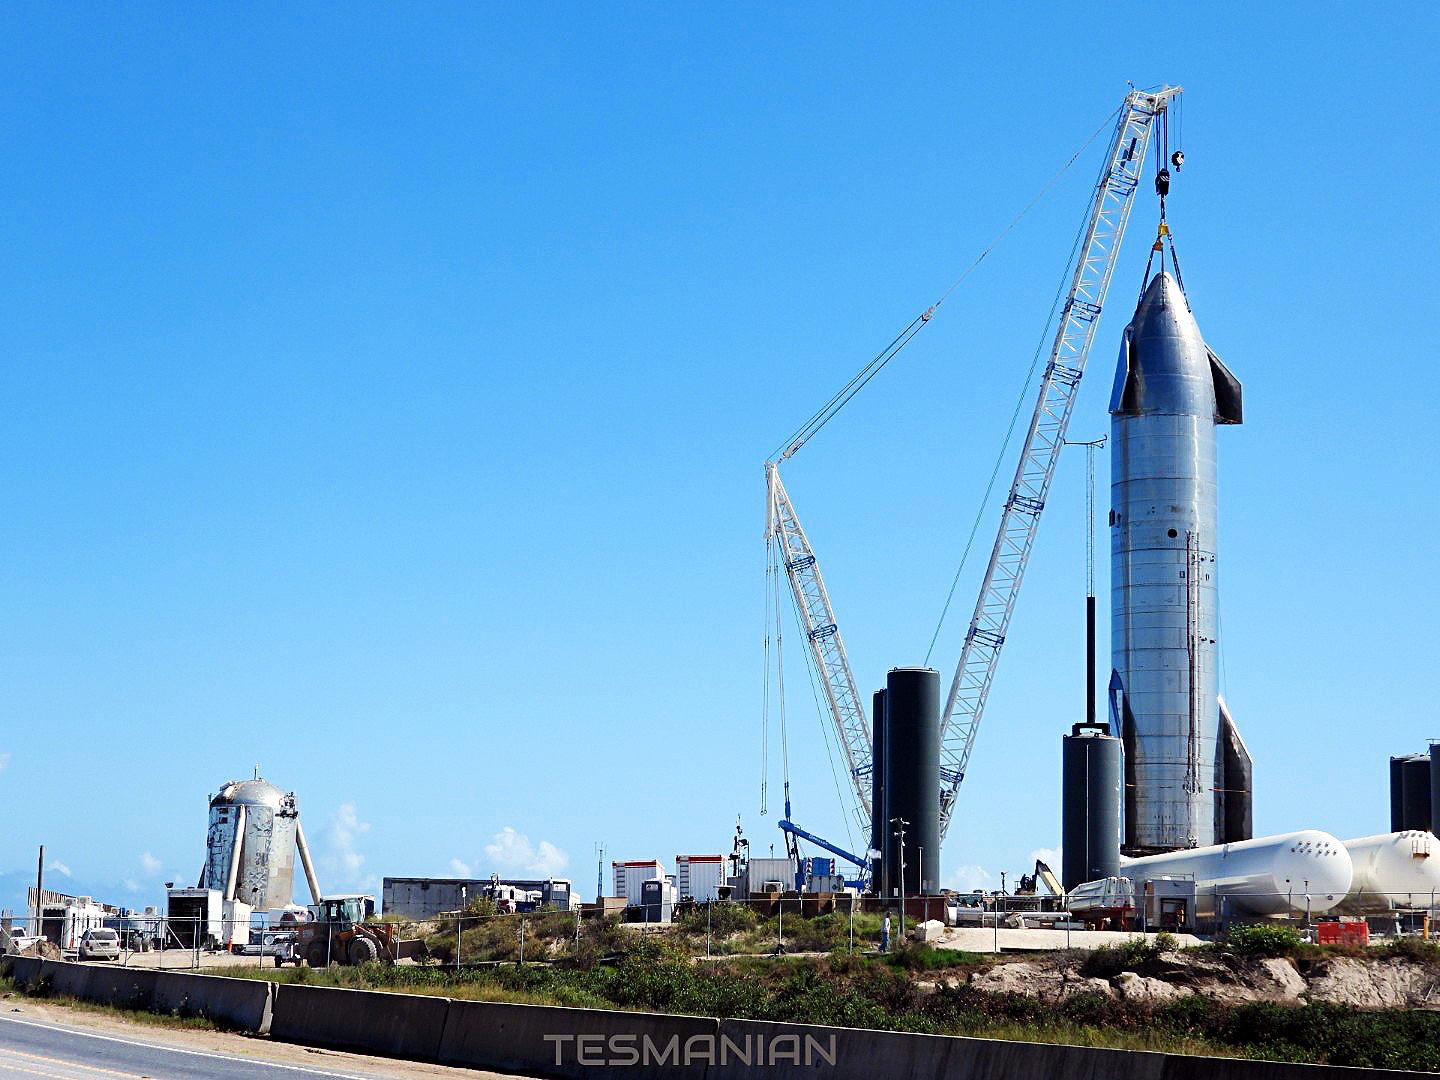 SpaceX will soon perform a second Starship SN8 Raptor engine test